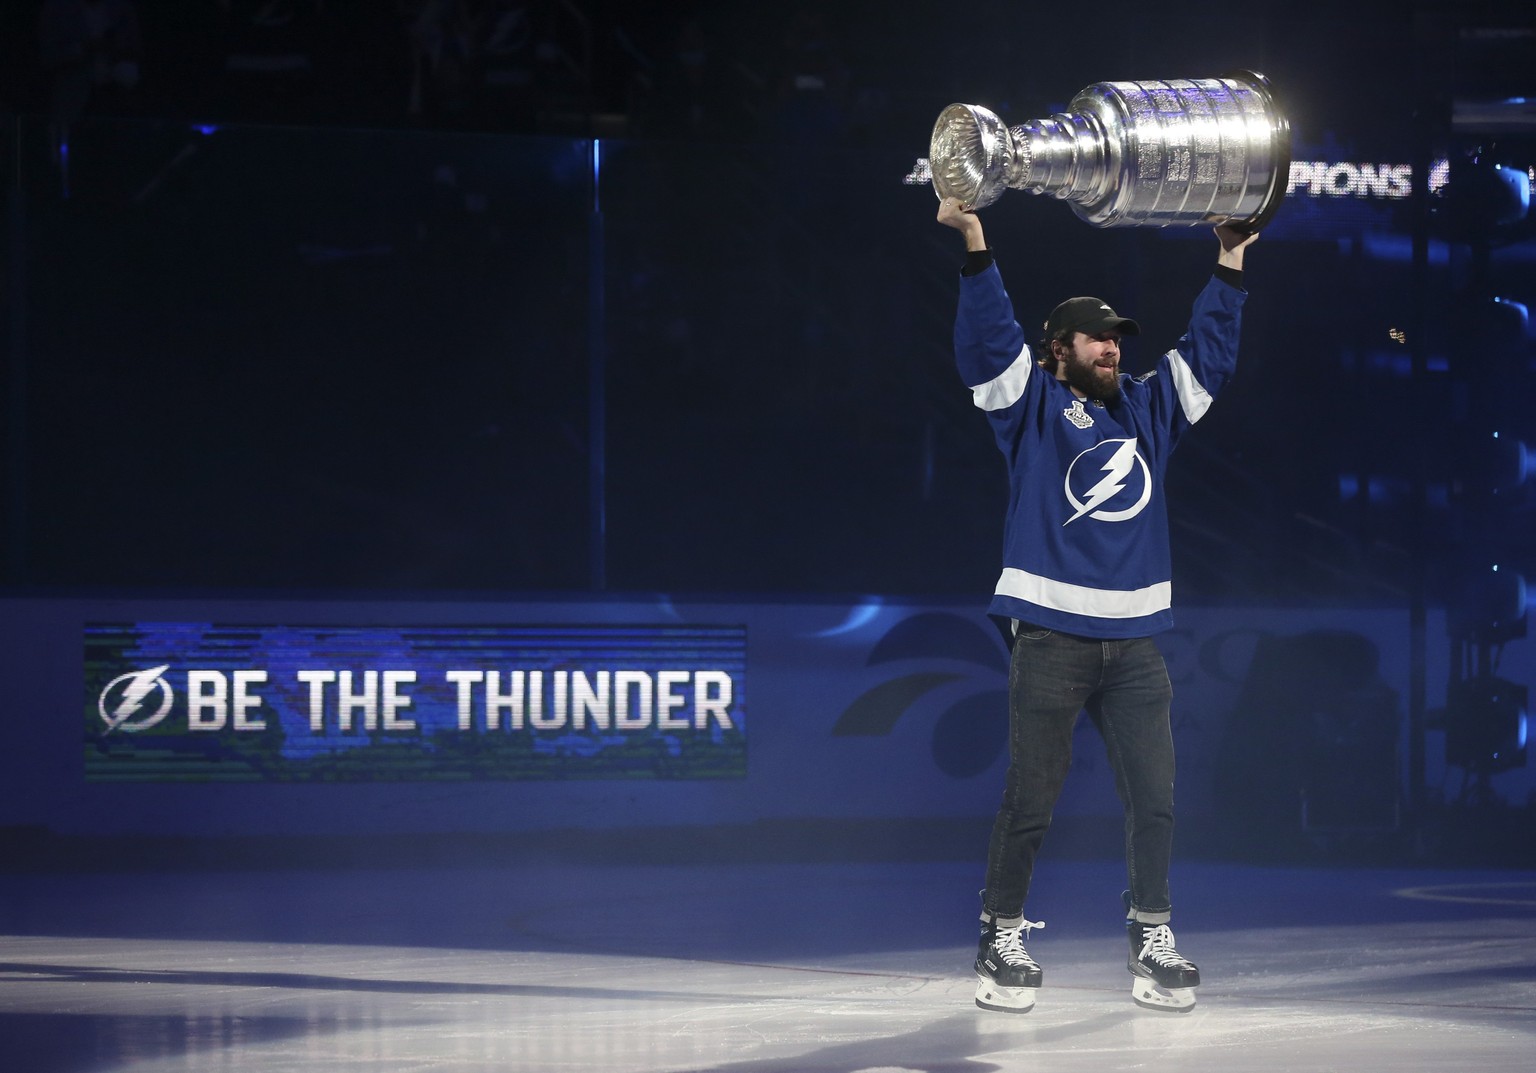 Tampa Bay Lighting&#039;s Nikita Kucherov holds the Stanley Cup in the air while skating around Amalie Arena, Tuesday, Sept. 29, 2020, in Tampa, Fla. (Dirk Shadd/Tampa Bay Times via AP)